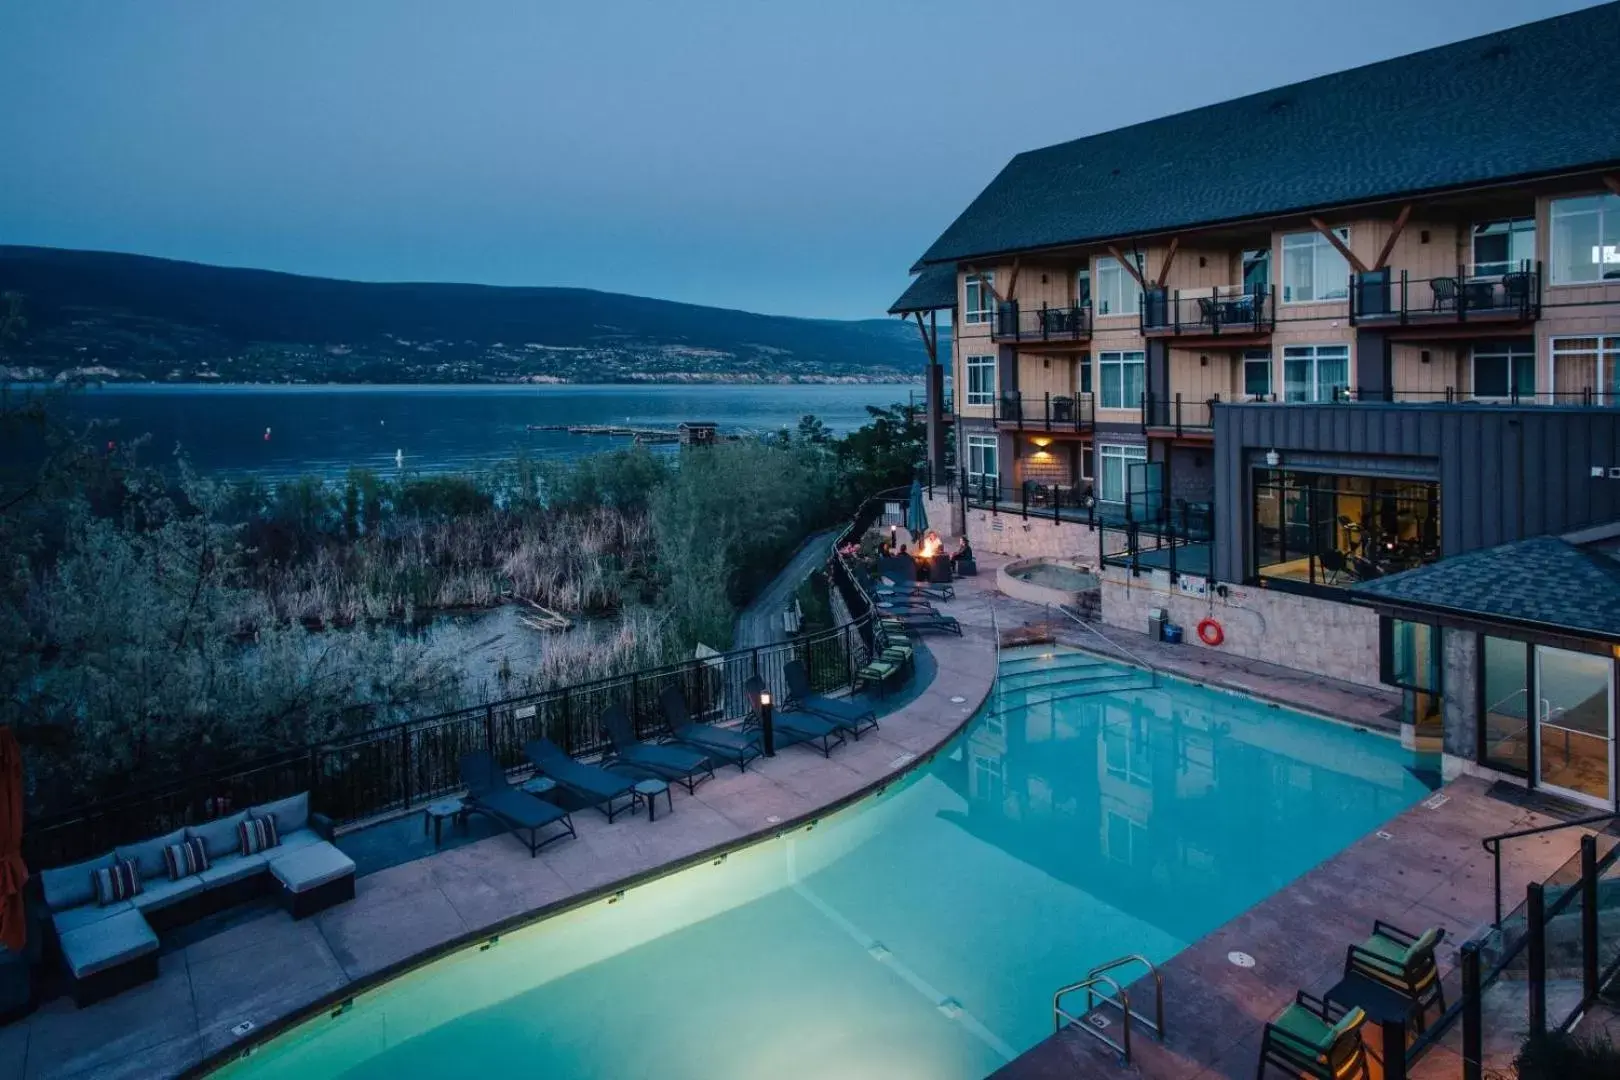 Property building, Pool View in Summerland Waterfront Resort & Spa